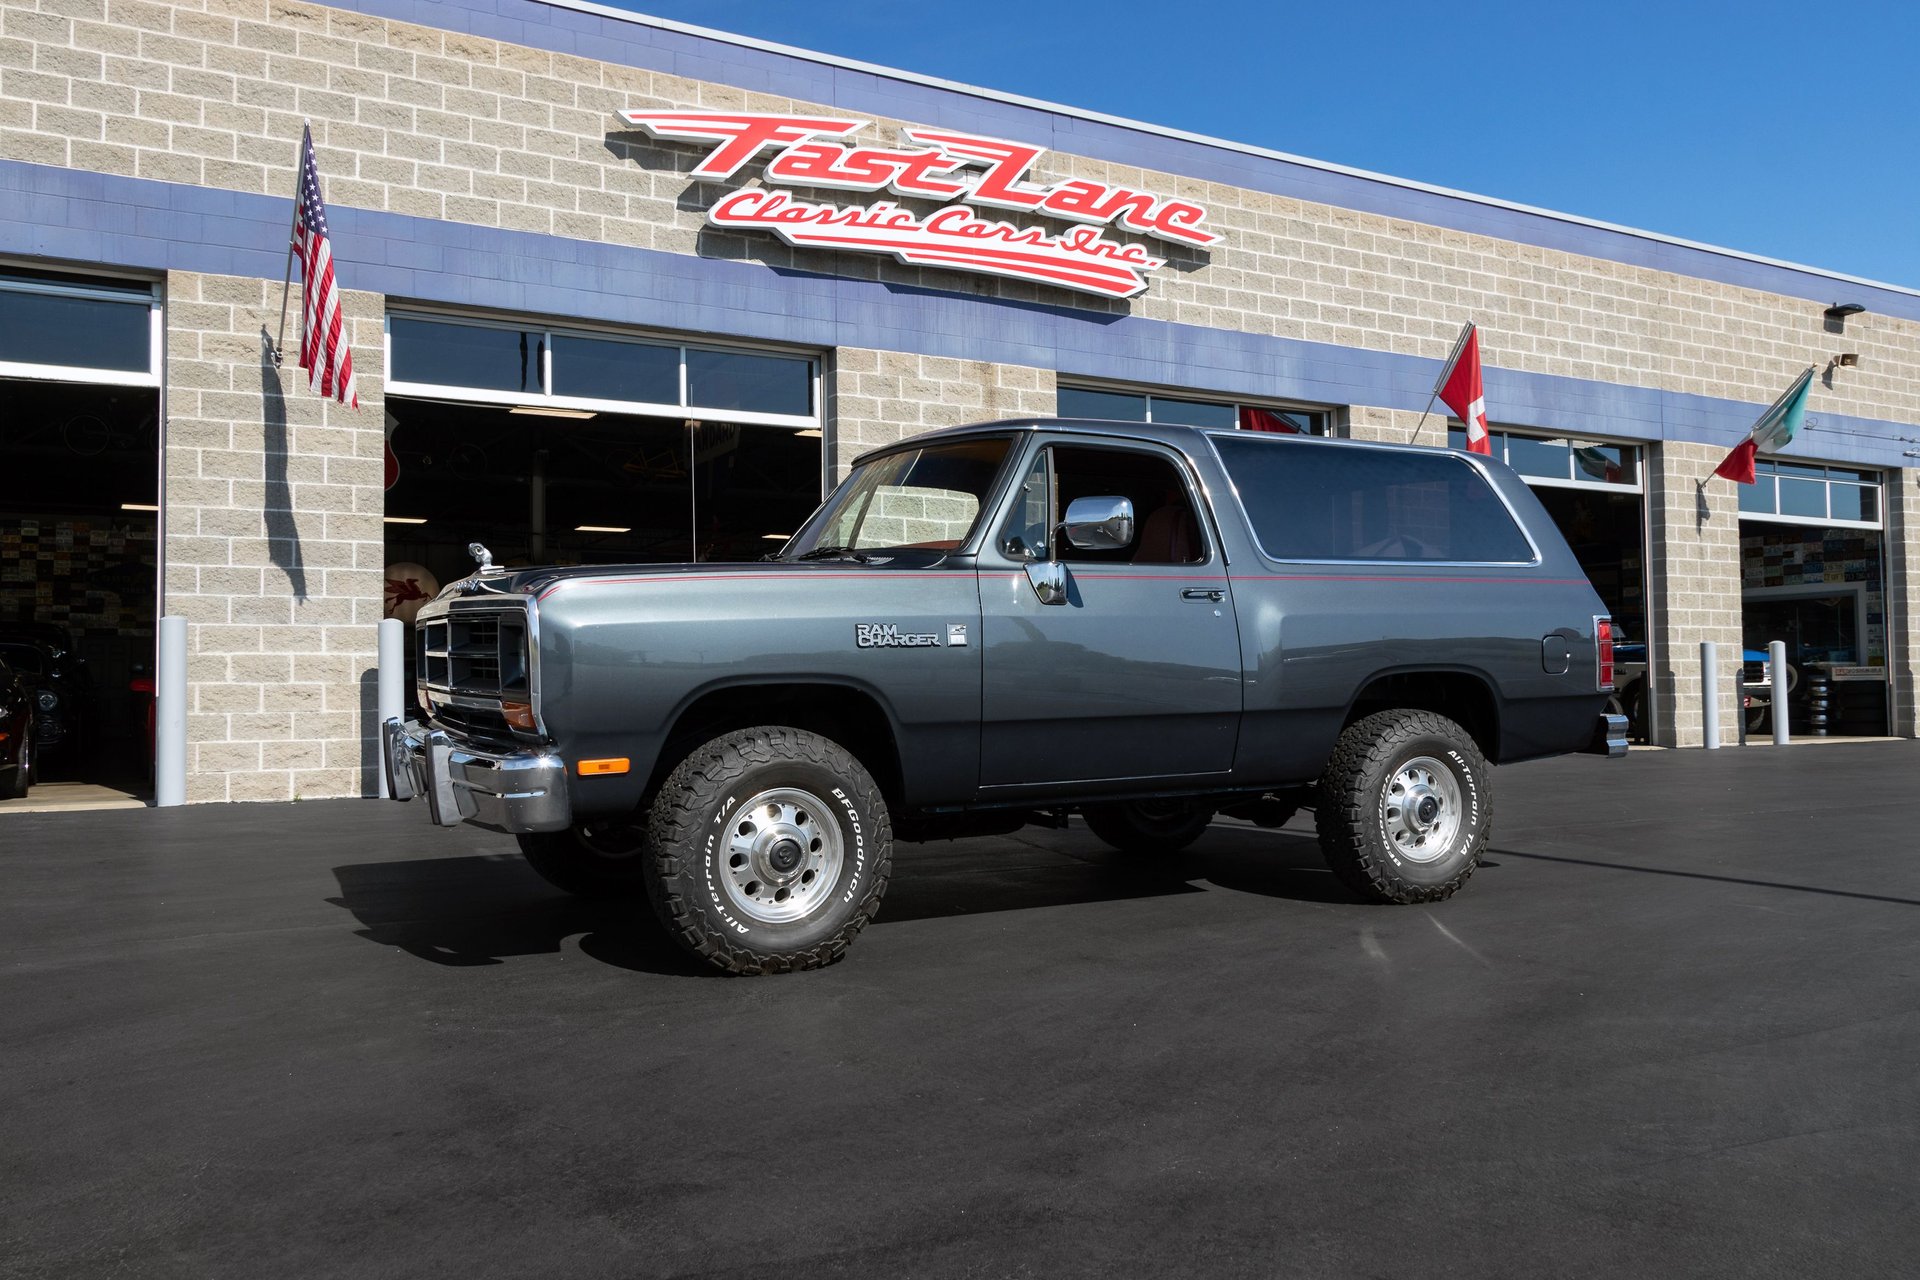 1988 Dodge Ramcharger | Fast Lane Classic Cars